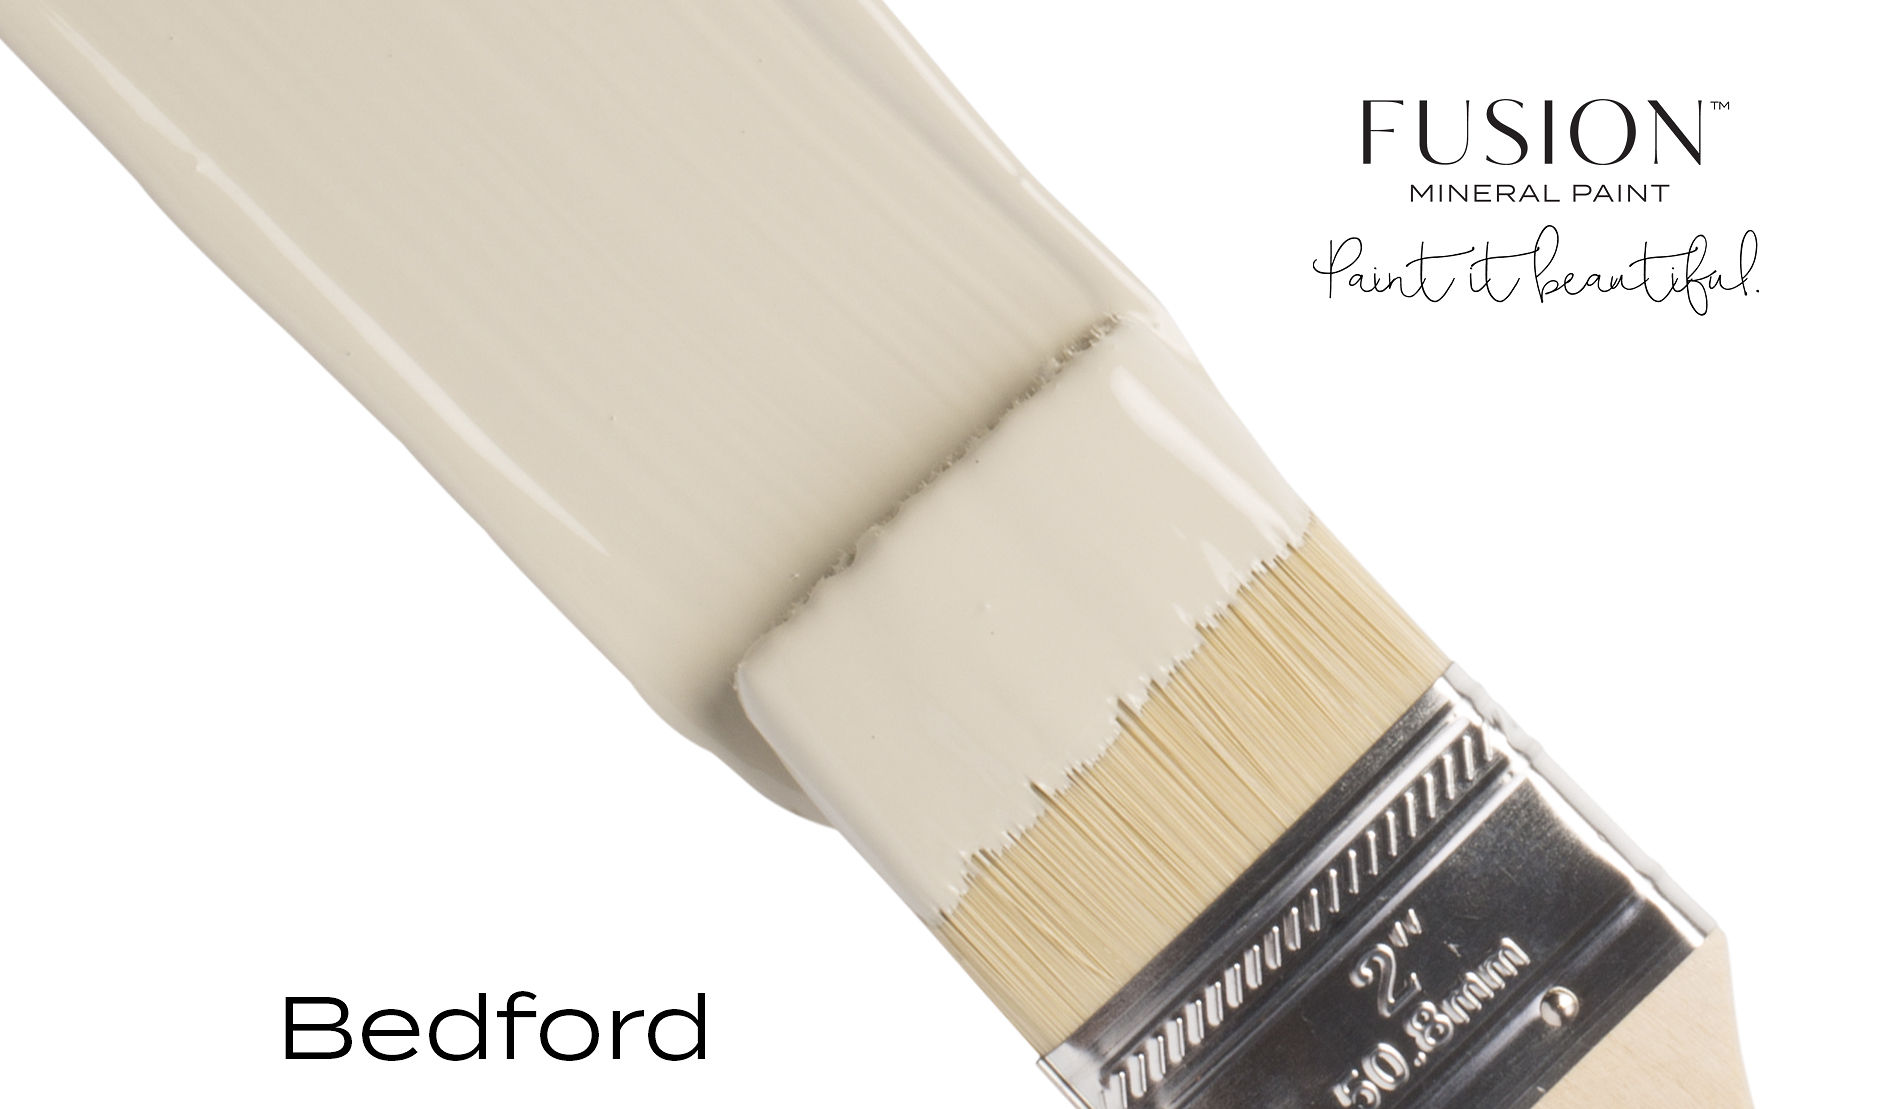 Bedford Fusion Mineral Paint Goed Gestyled Brielle